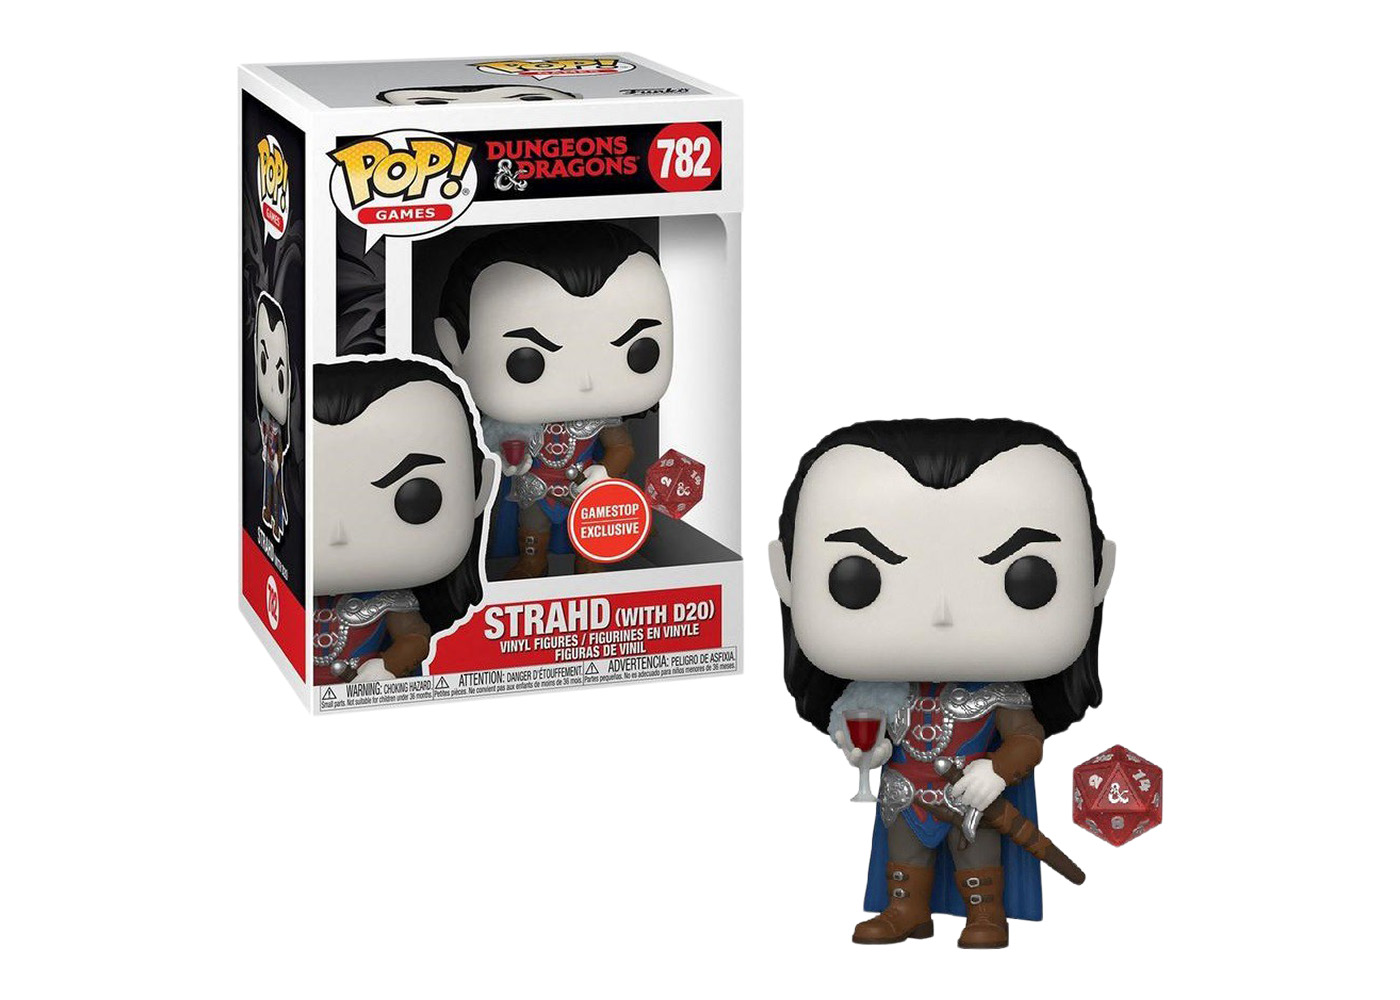 Funko Pop! Games Dungeons & Dragons Strahd with D20 GameStop 